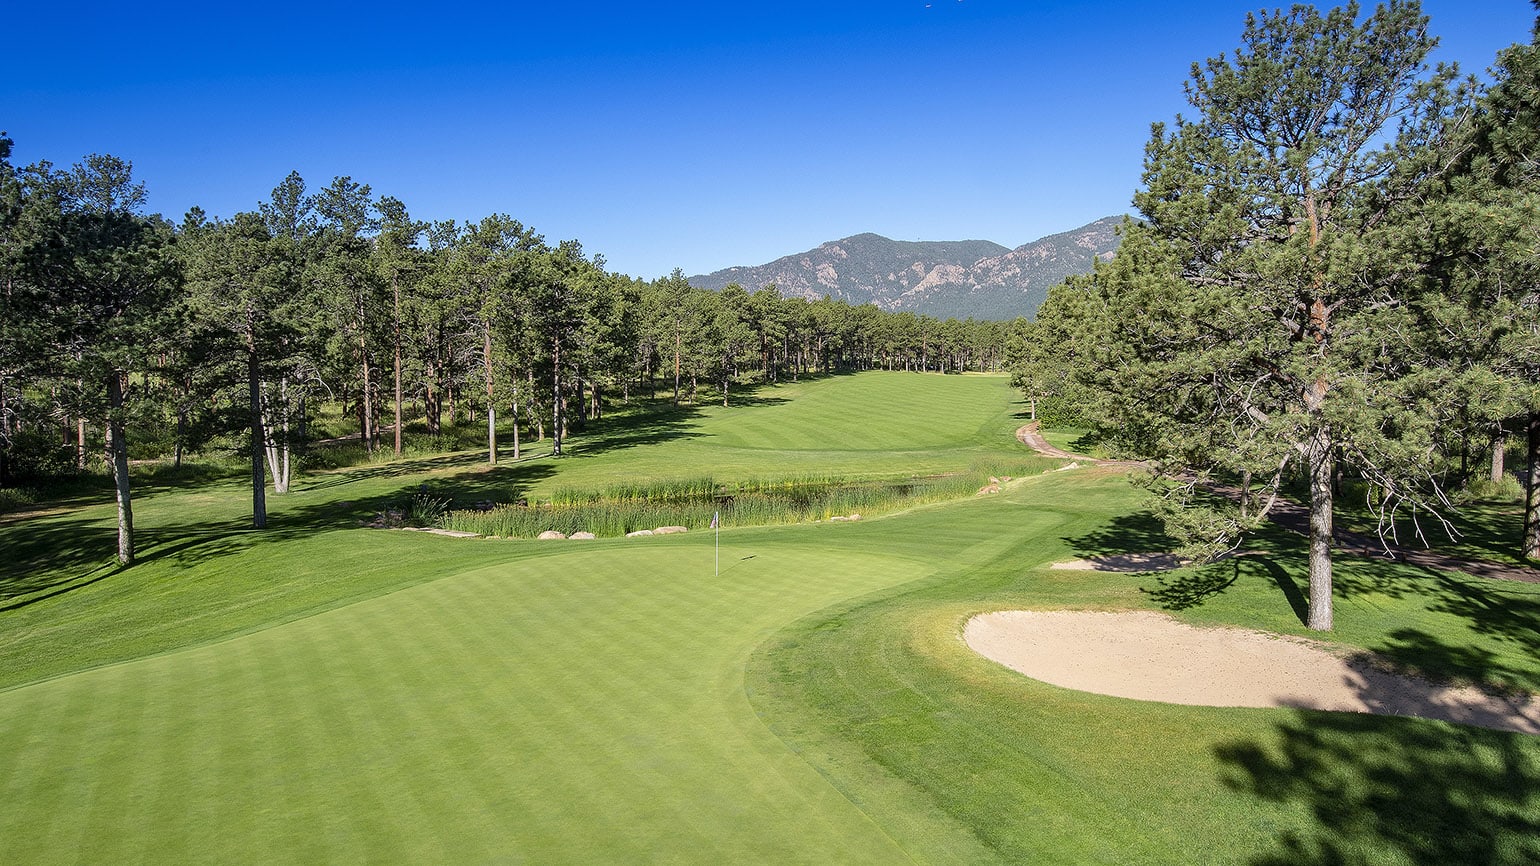 Force of Nature Air Force Academy Set to Host 74th U.S. Girls' Junior